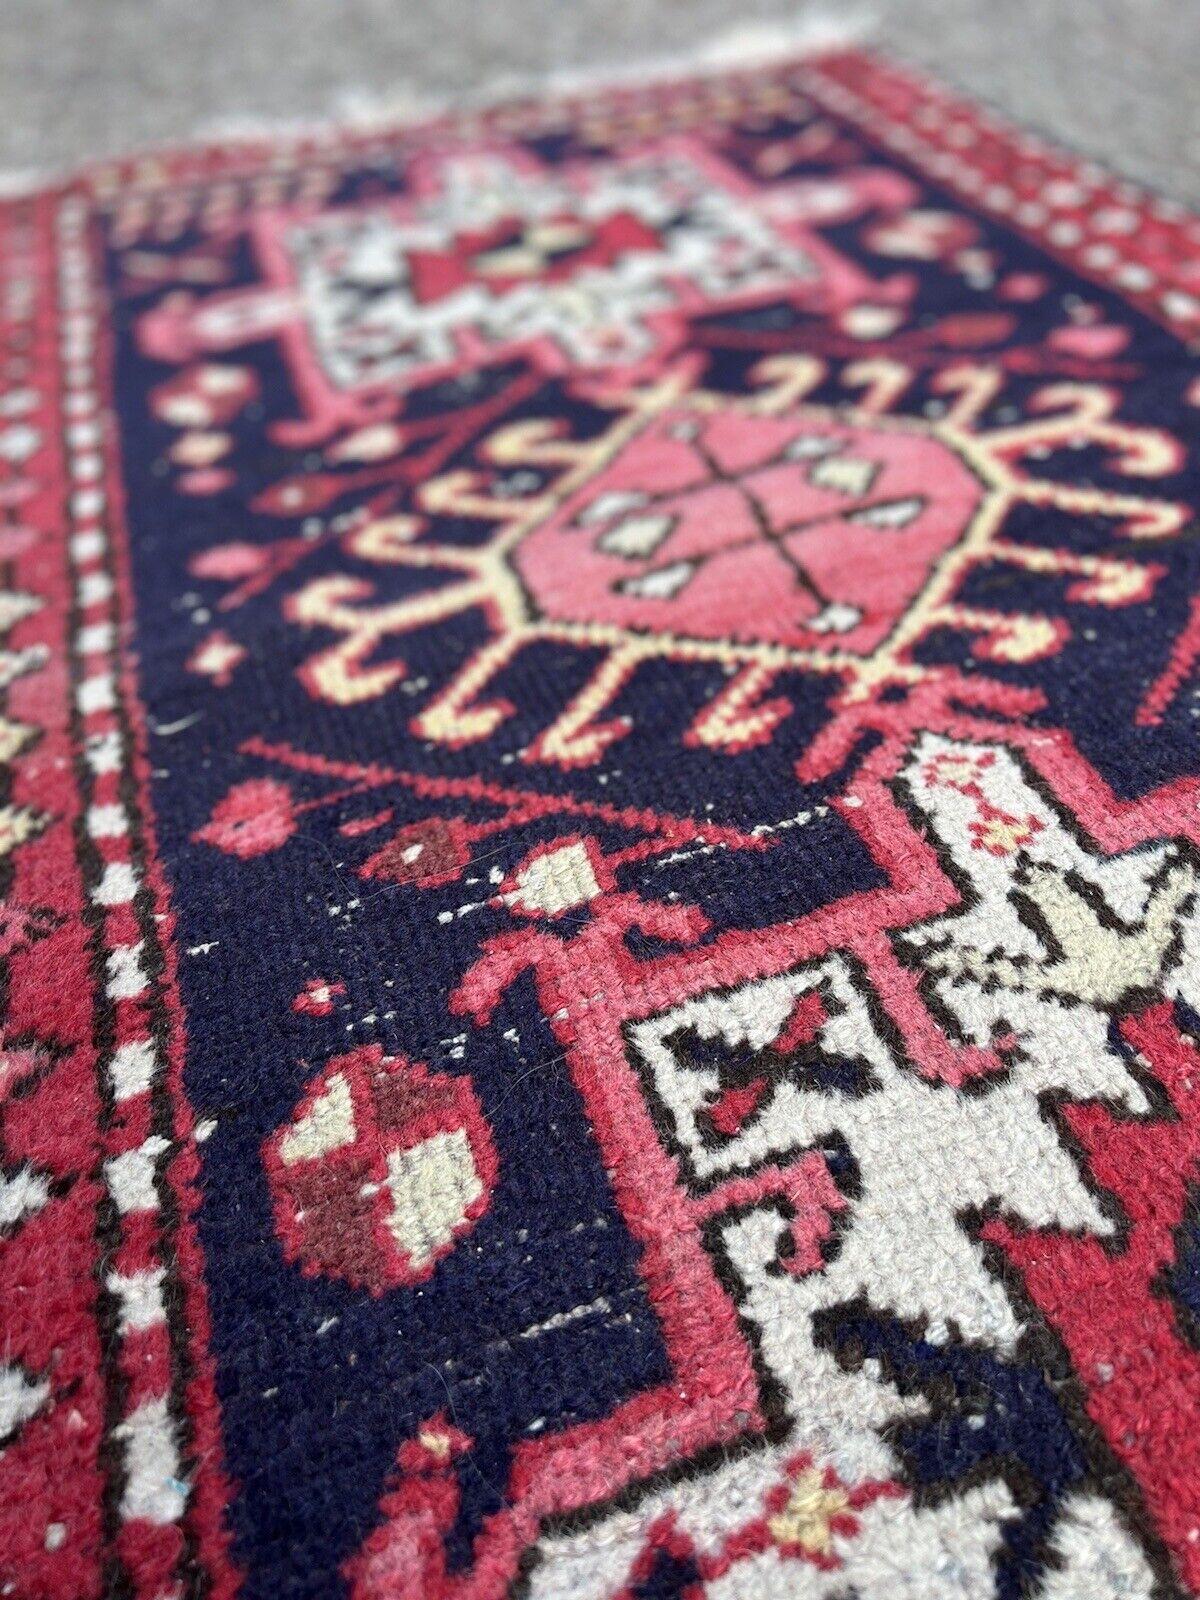 Handmade Vintage Persian Style Hamadan Rug 2.2' x 3.9', 1970s - 1S37 In Good Condition For Sale In Bordeaux, FR